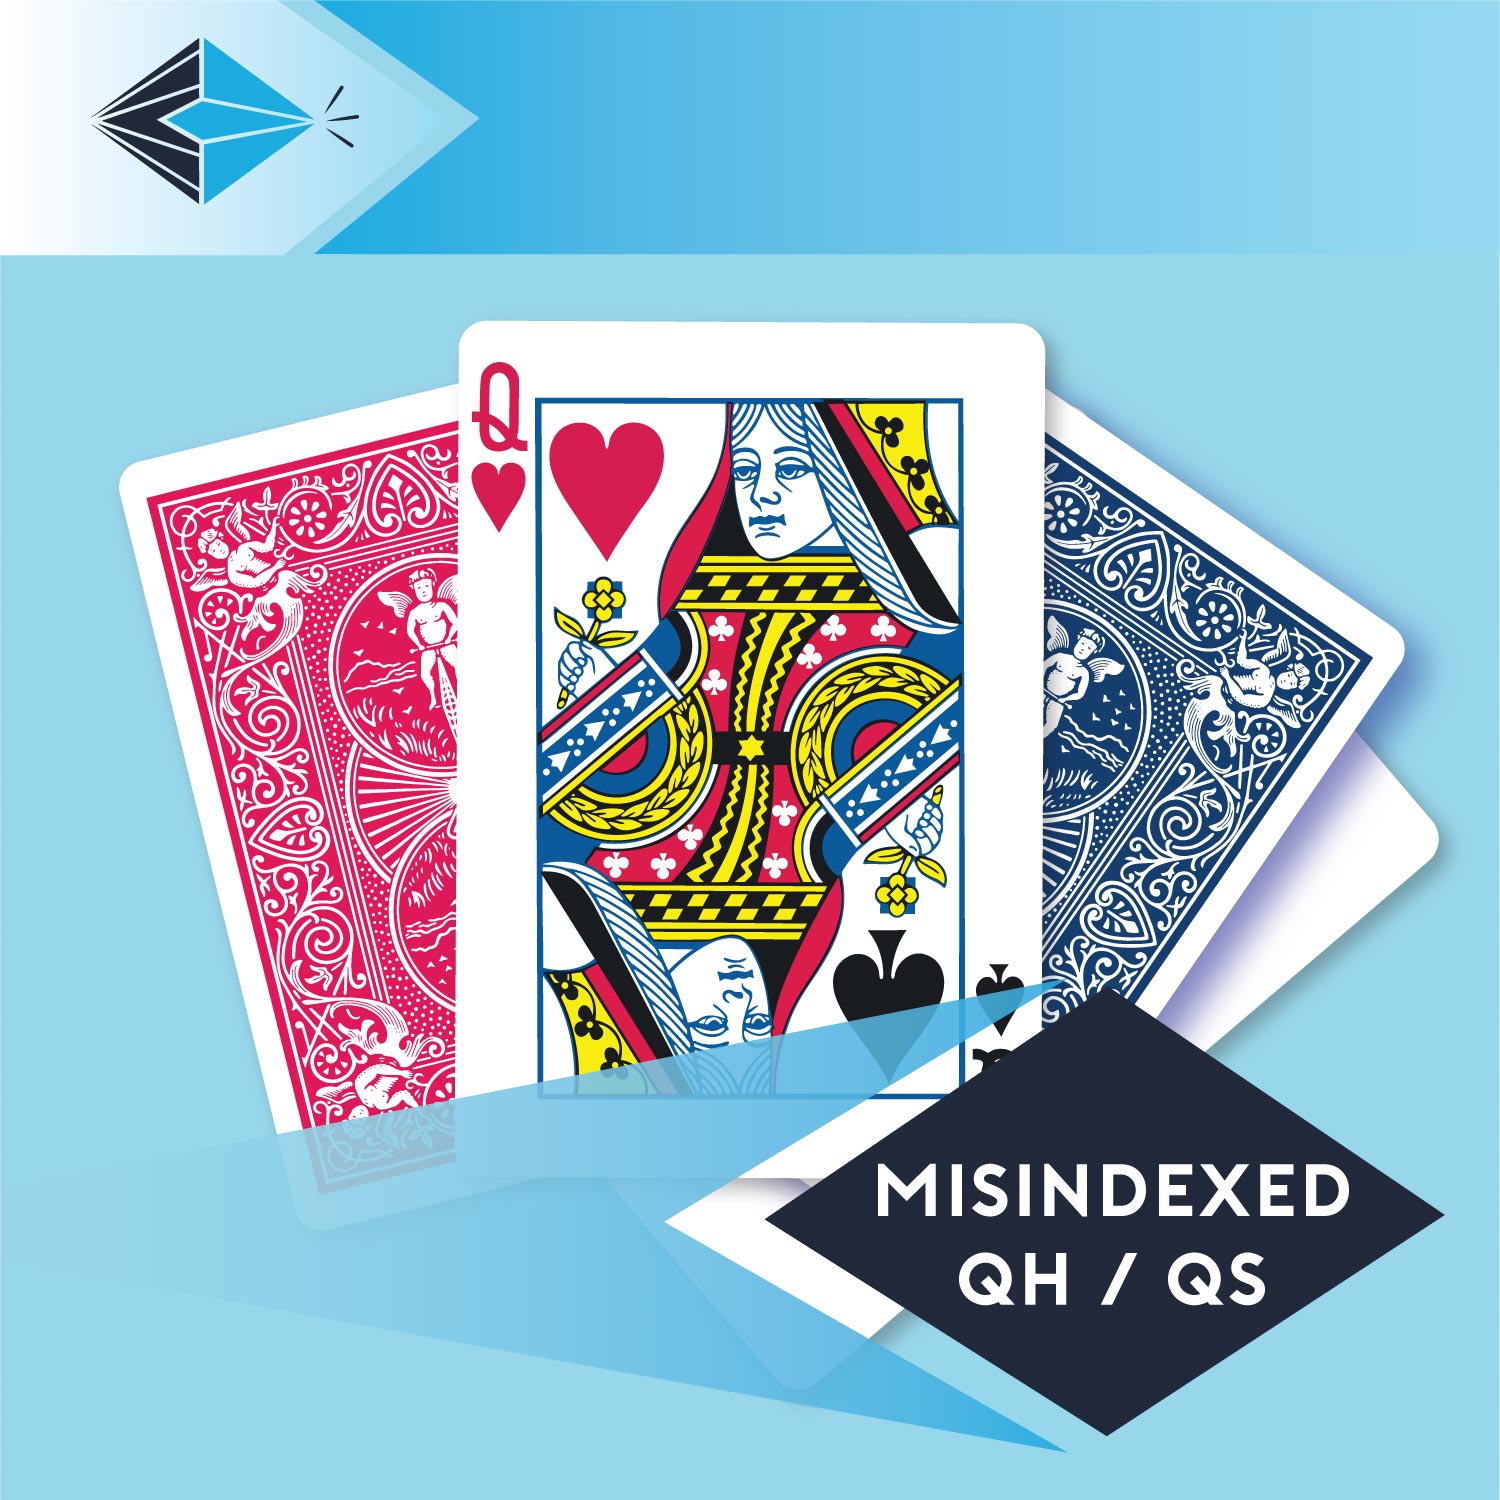 mis-indexed-queen-spades-clubs-qh-qs-playing card for magicians printing printers Stockport Manchester UK